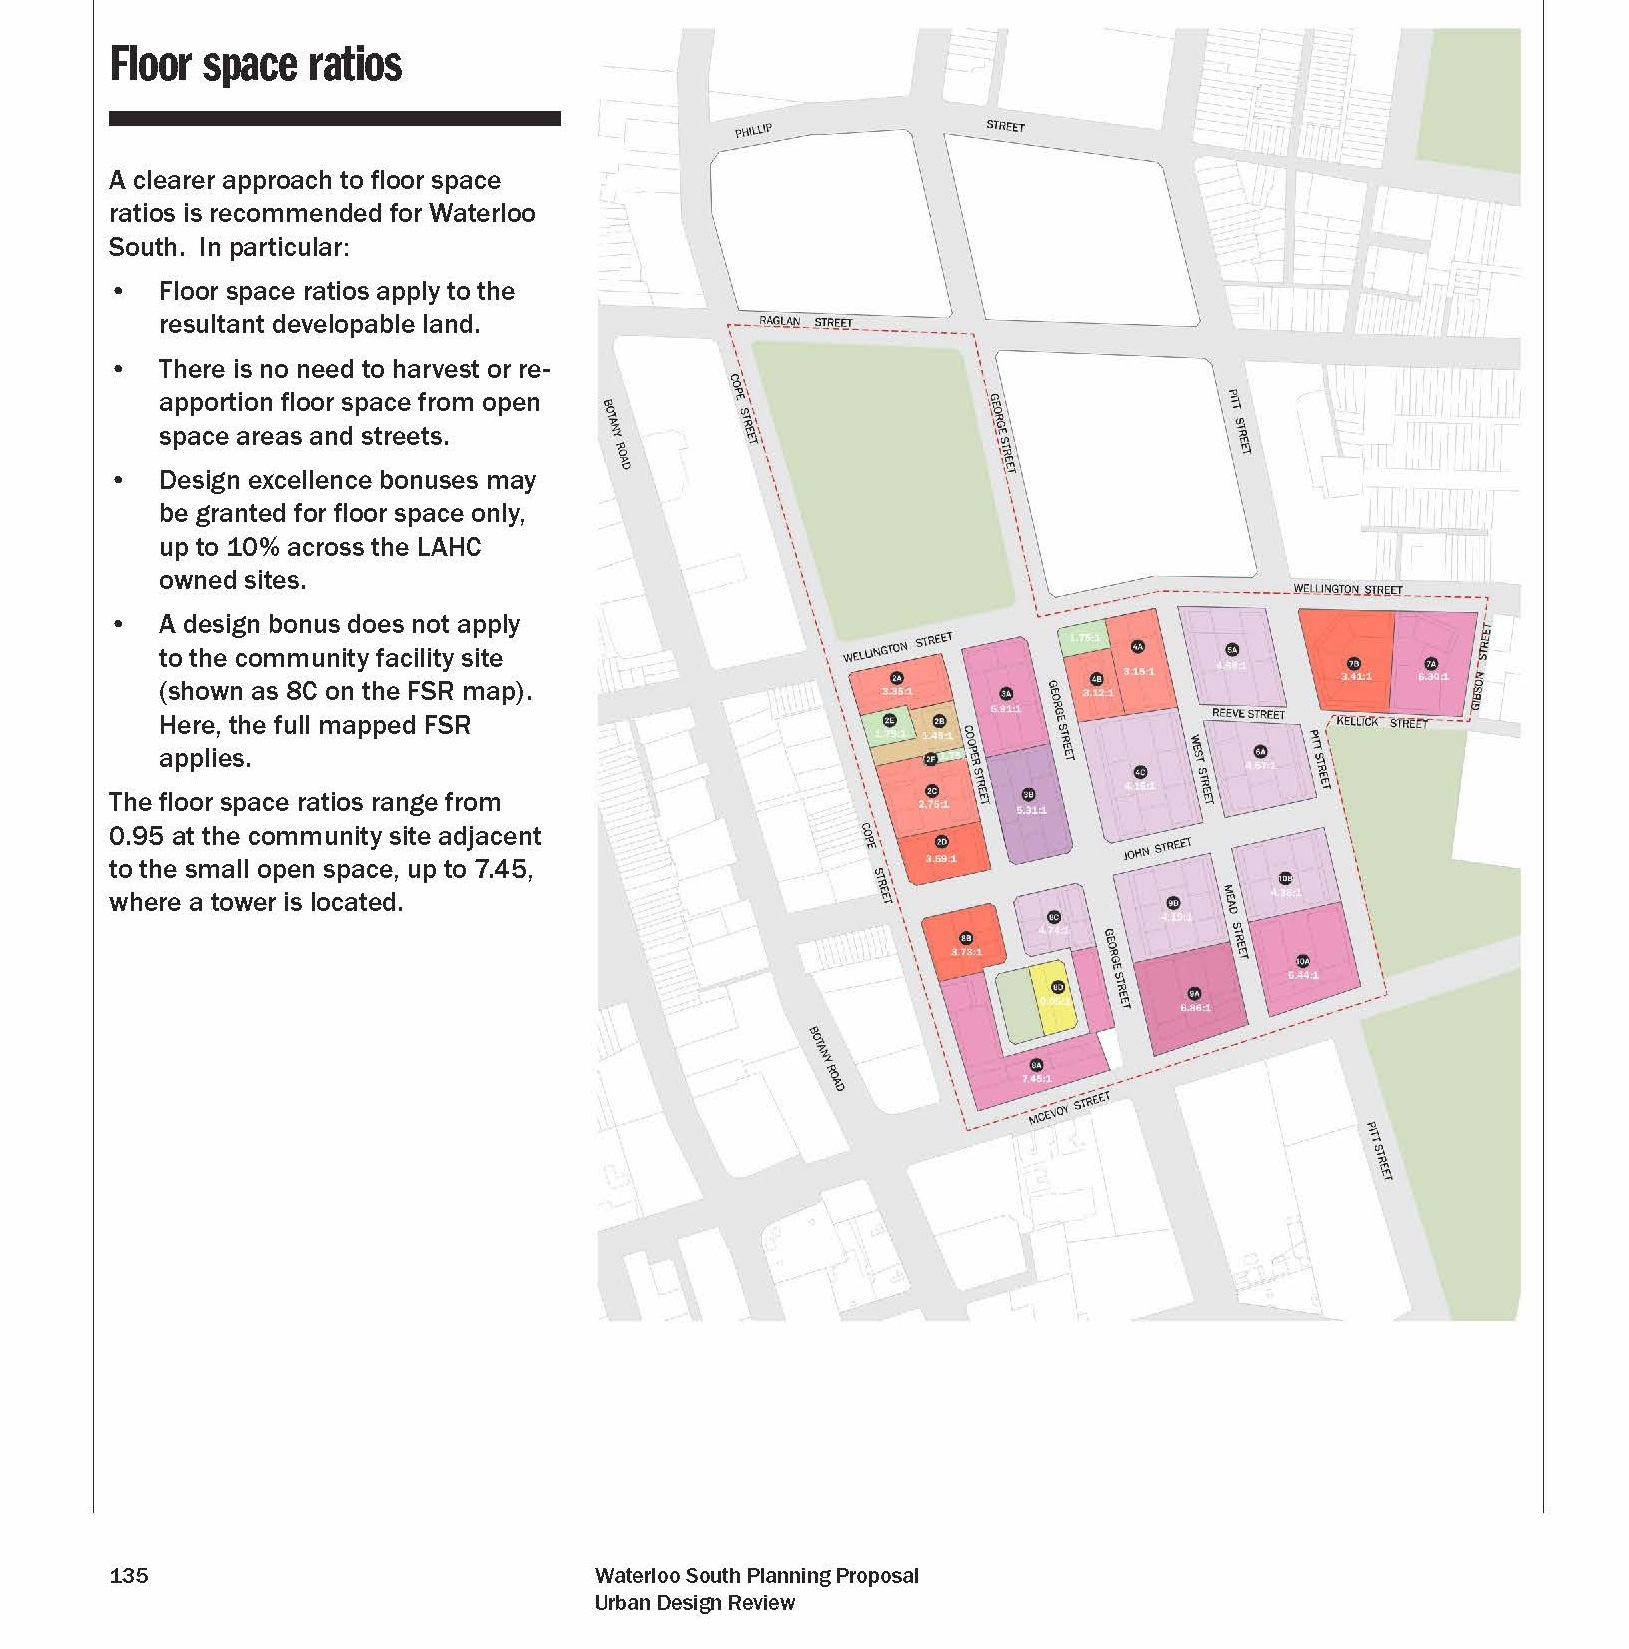 Floor Space Ratios (FSRs) for Waterloo South Planning Proposal